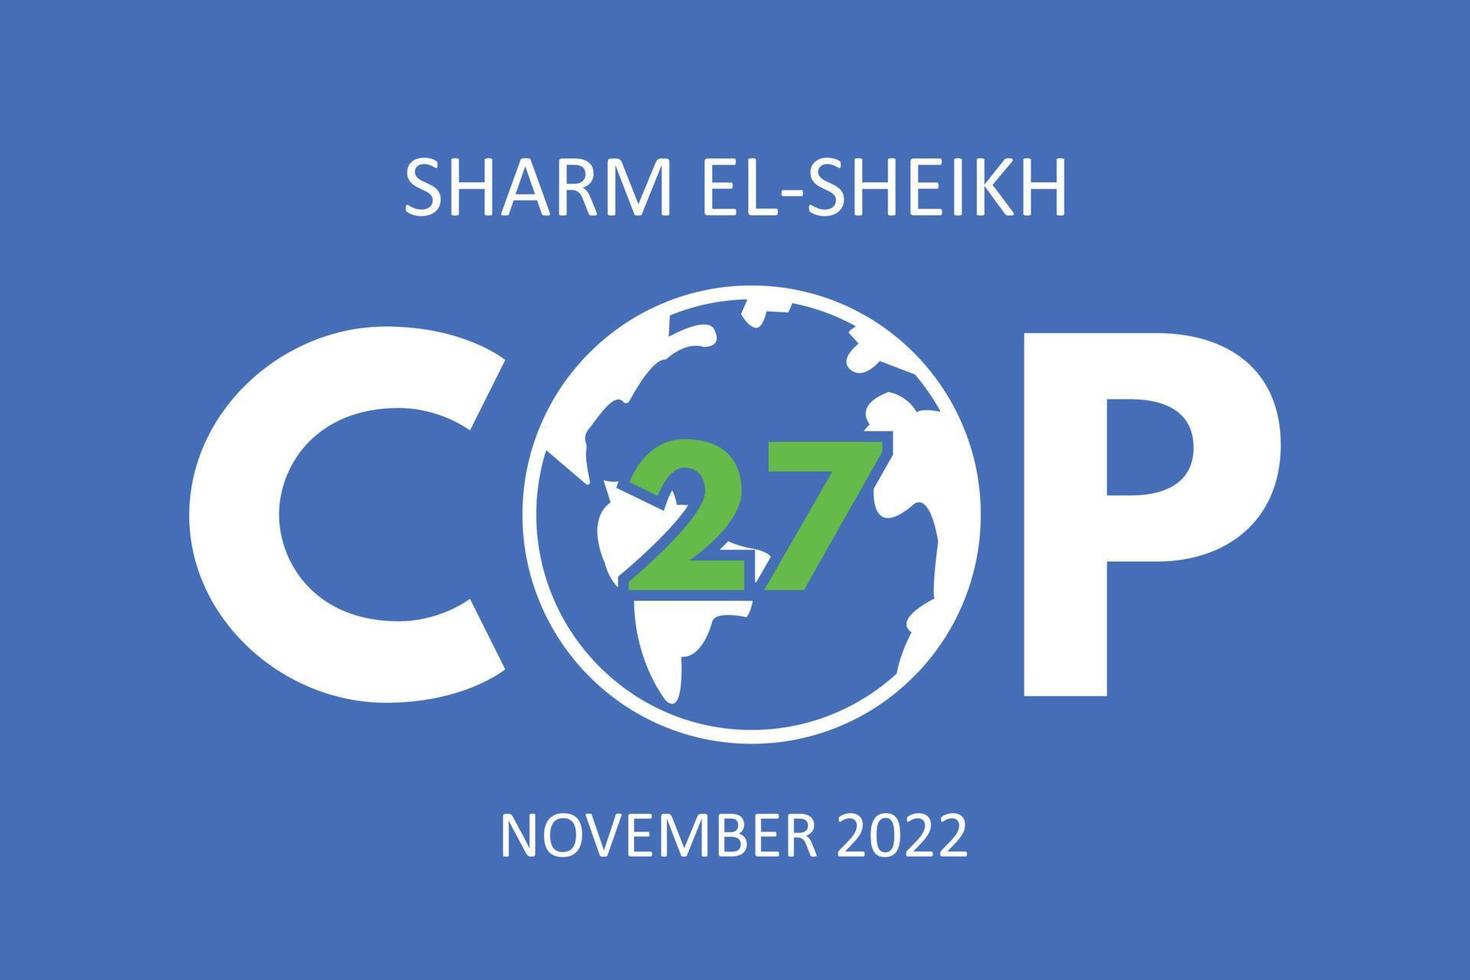 Annual climate change conference COP 27 Sharm El-Sheikh in November 2022. International climate summit banner. Global Warming. Vector illustration